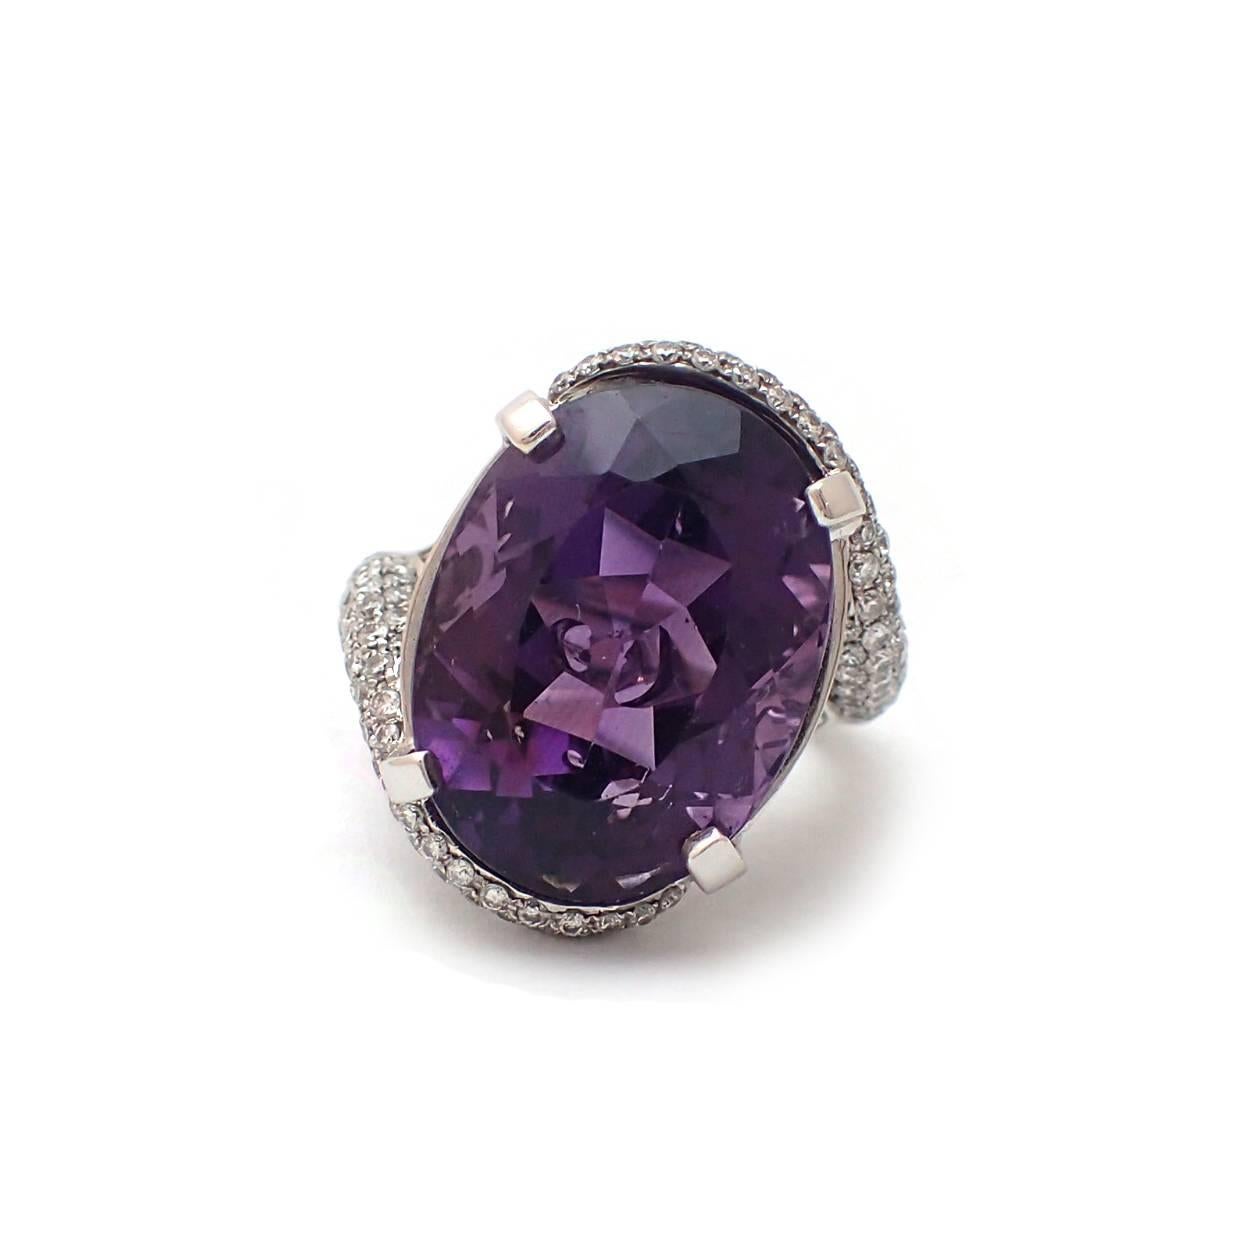 Make a statement with this ample 18.13ct oval Amethyst.  Showing off the stone is 1.2ct of diamonds in an 18k white gold swirl setting.  